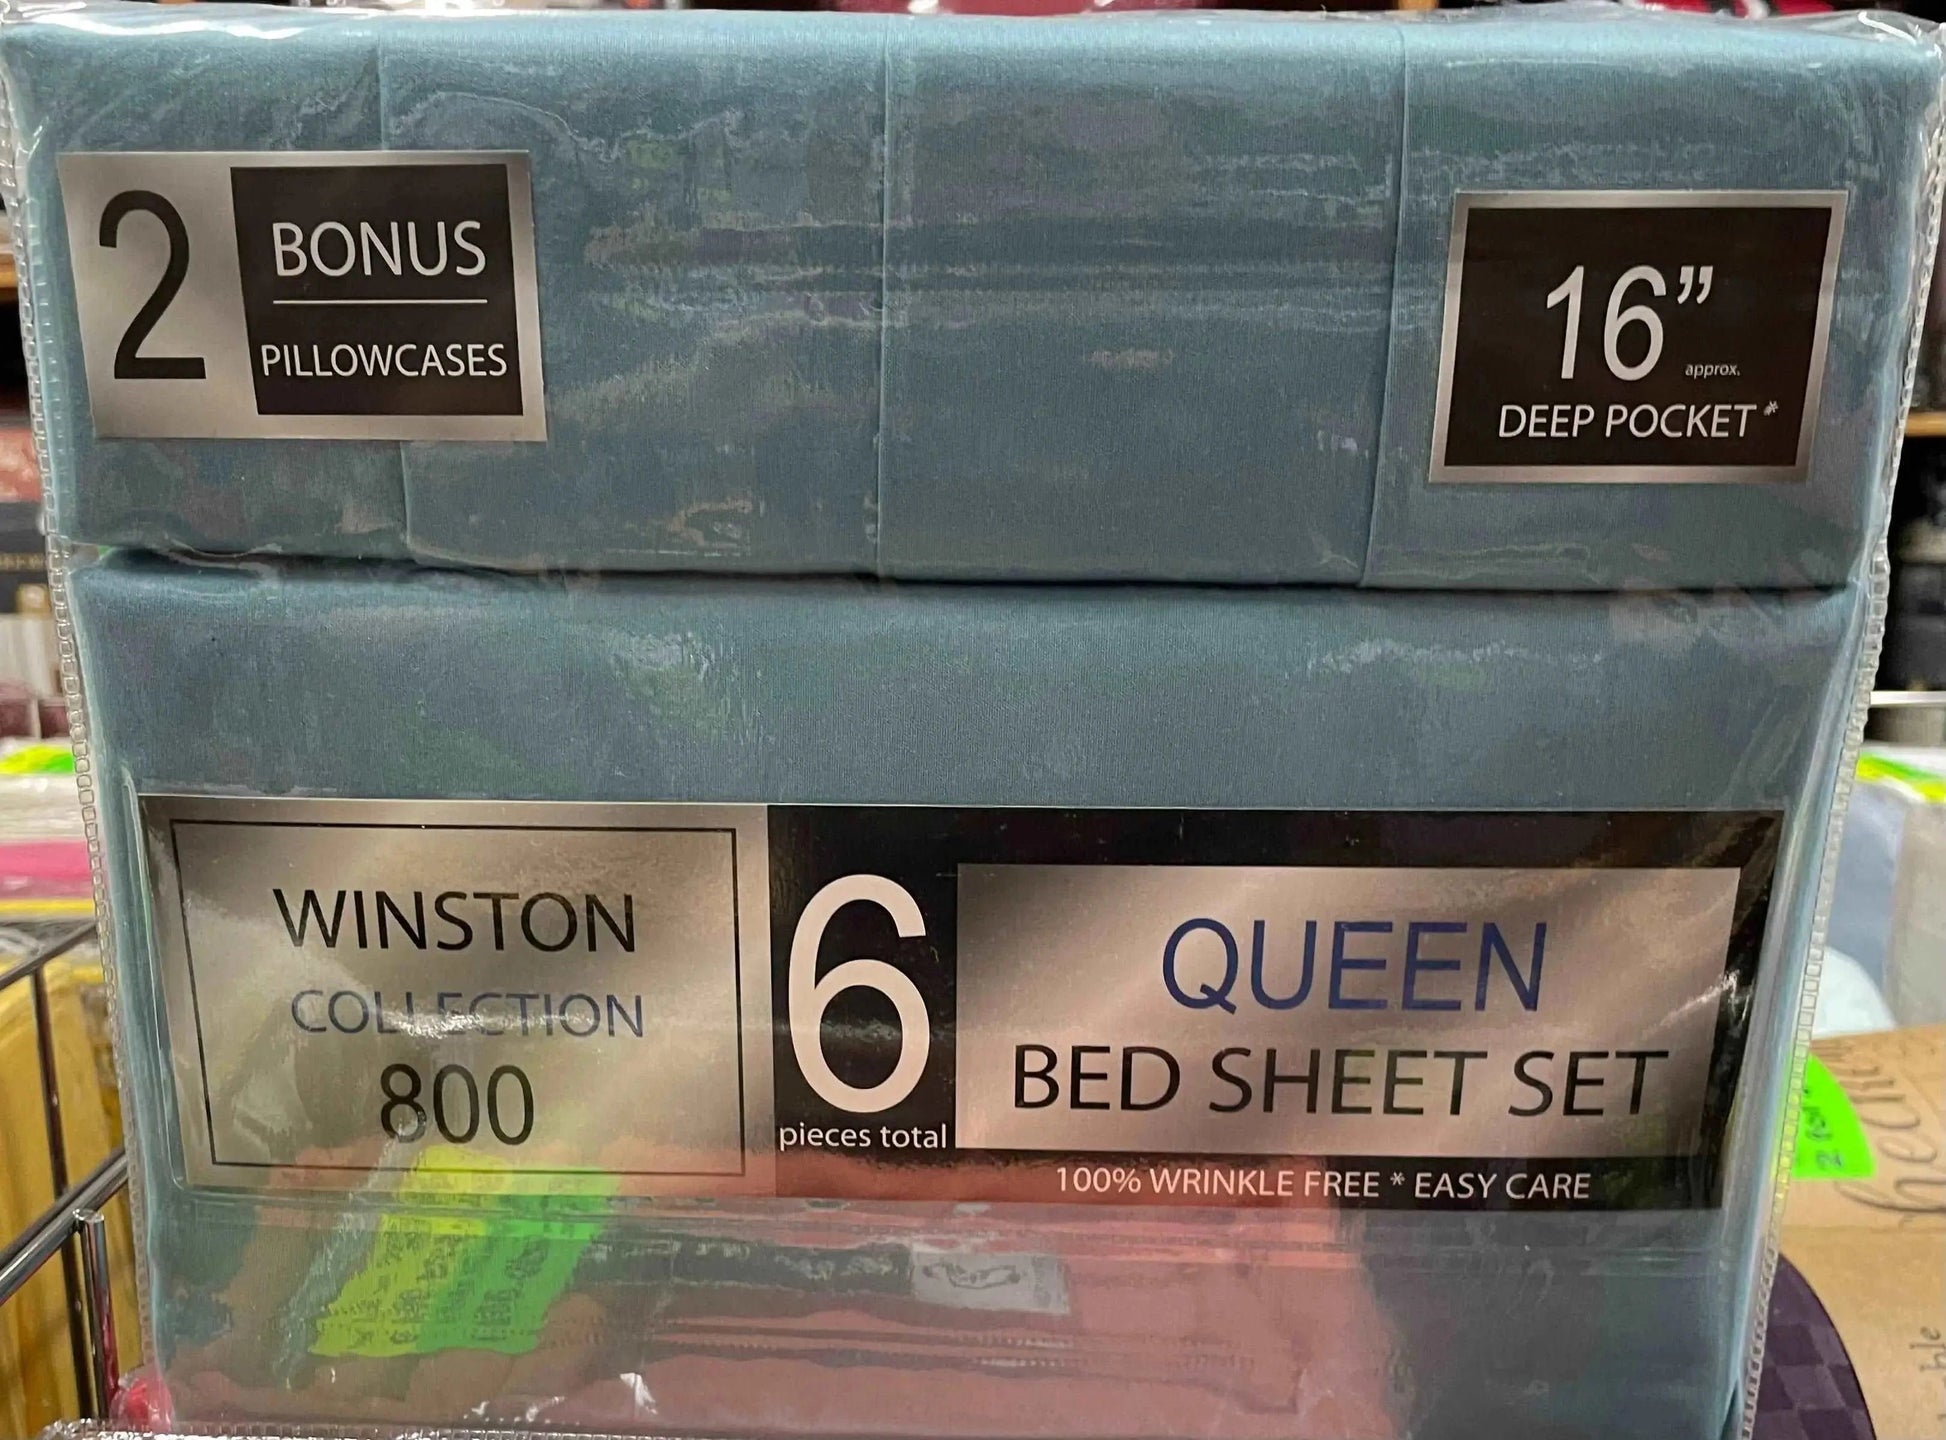 Linen World Bed Sheets “Winston” 800 Collection 6 pc Deep Pocket Sheet Set in All Sizes